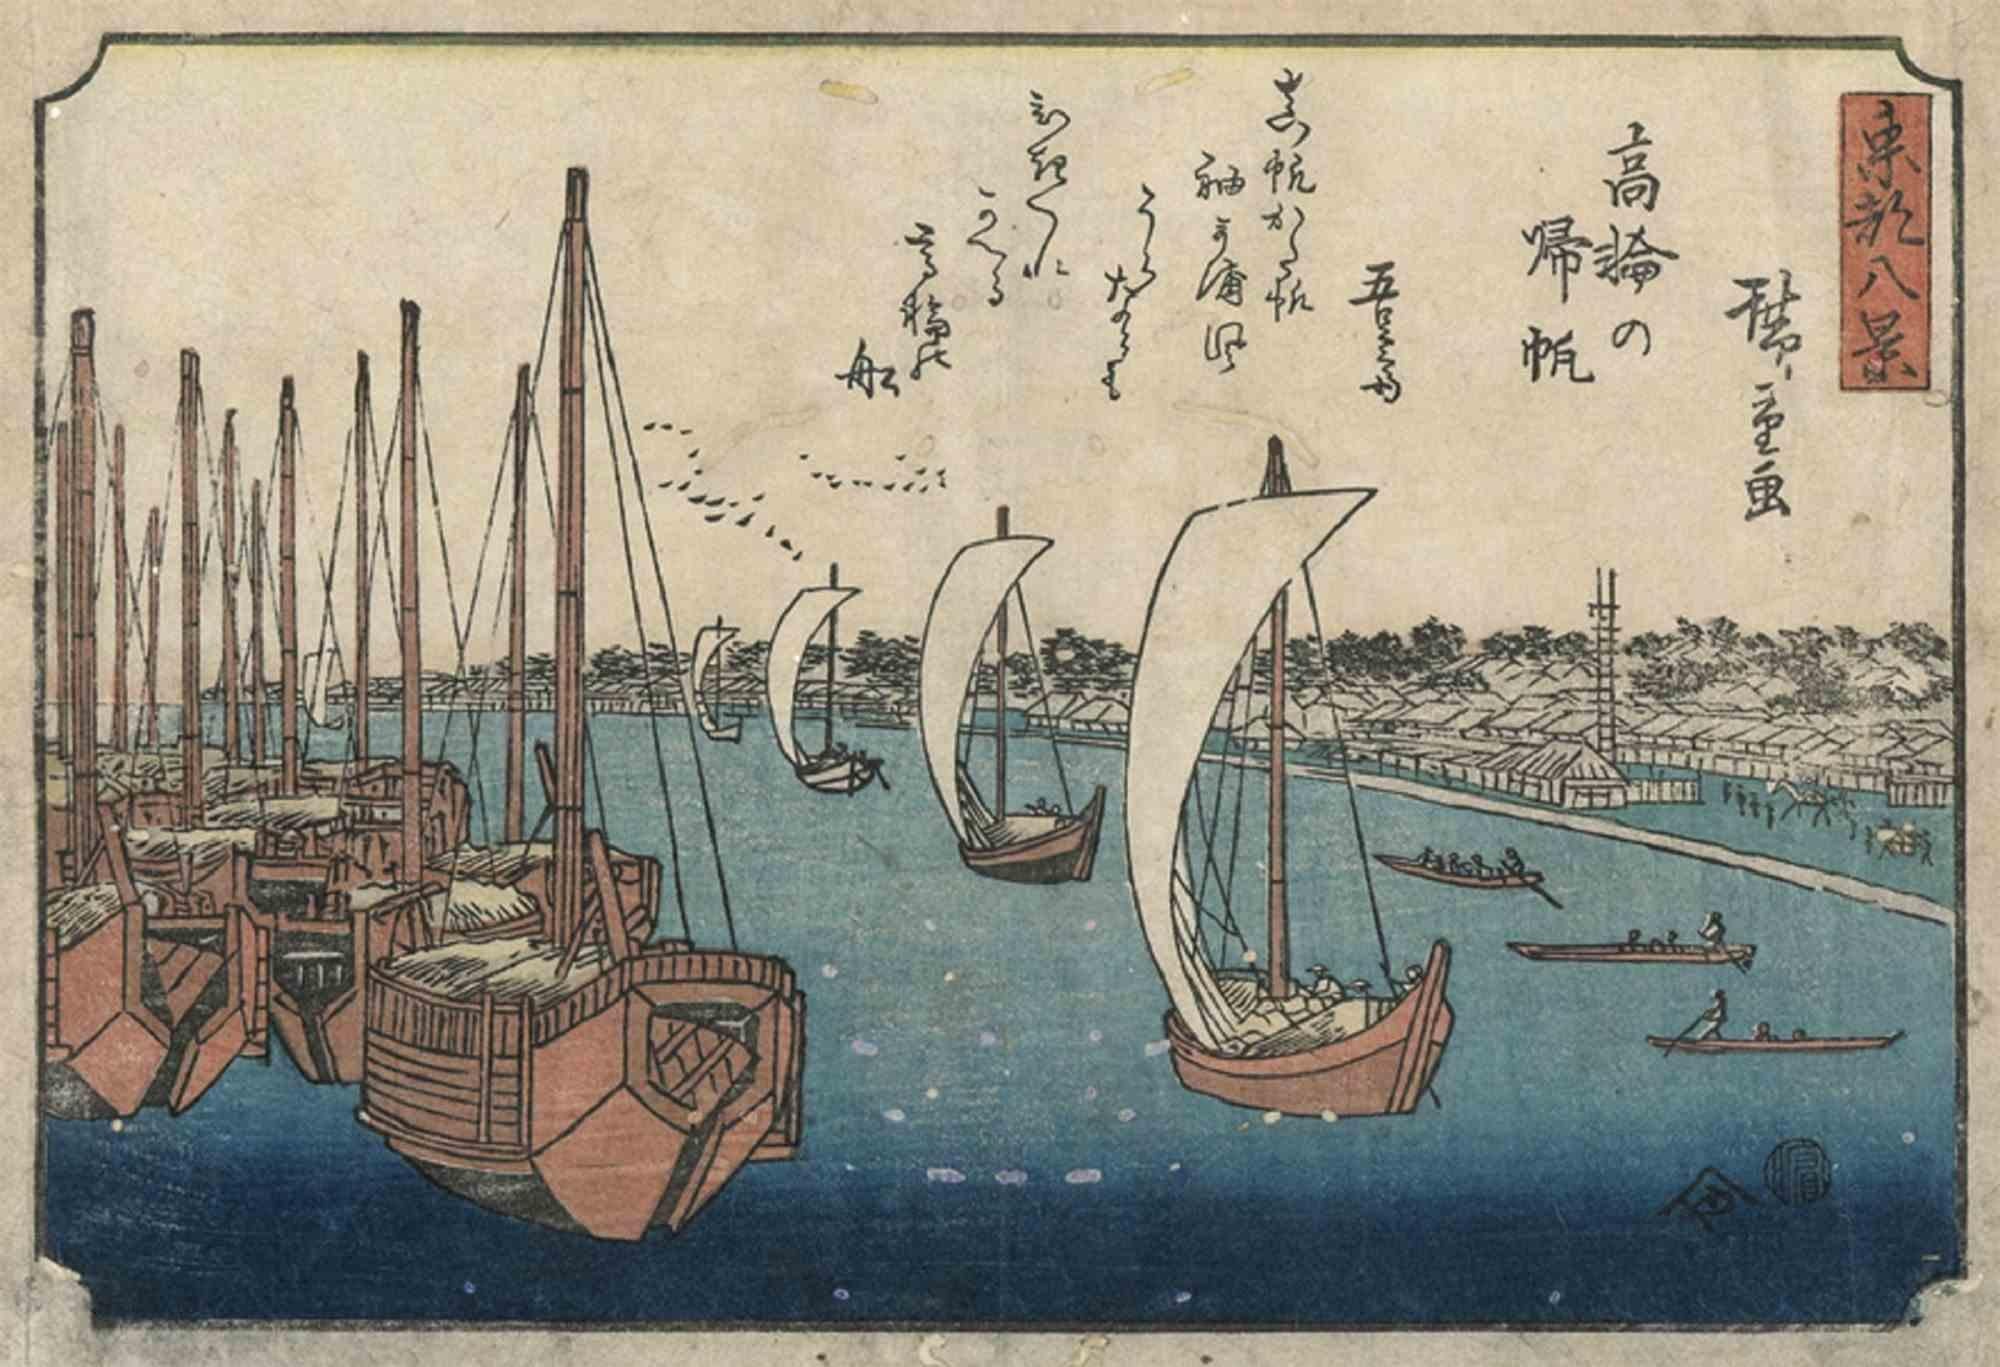 Takanawa no kihan is a modern artwork realized between 1843 and 1847 after Utagawa Hiroshige.

Ukiyo-e color woodblock print from the Touto hakkei (The Eight Famous Views of the Capital of the East) series.

Mounted under passepartout. 

The artwork